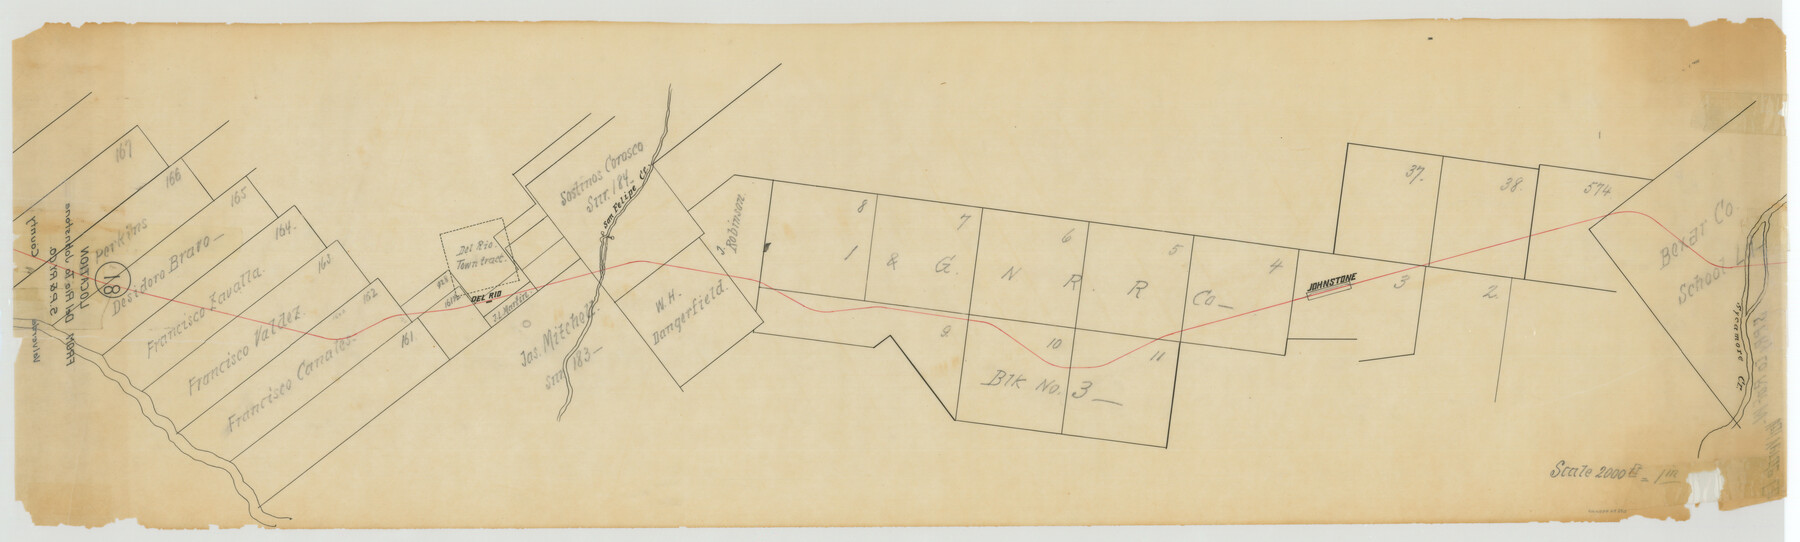 64290, Location from Del Rio to Johnstone, Southern Pacific Railway Co., General Map Collection